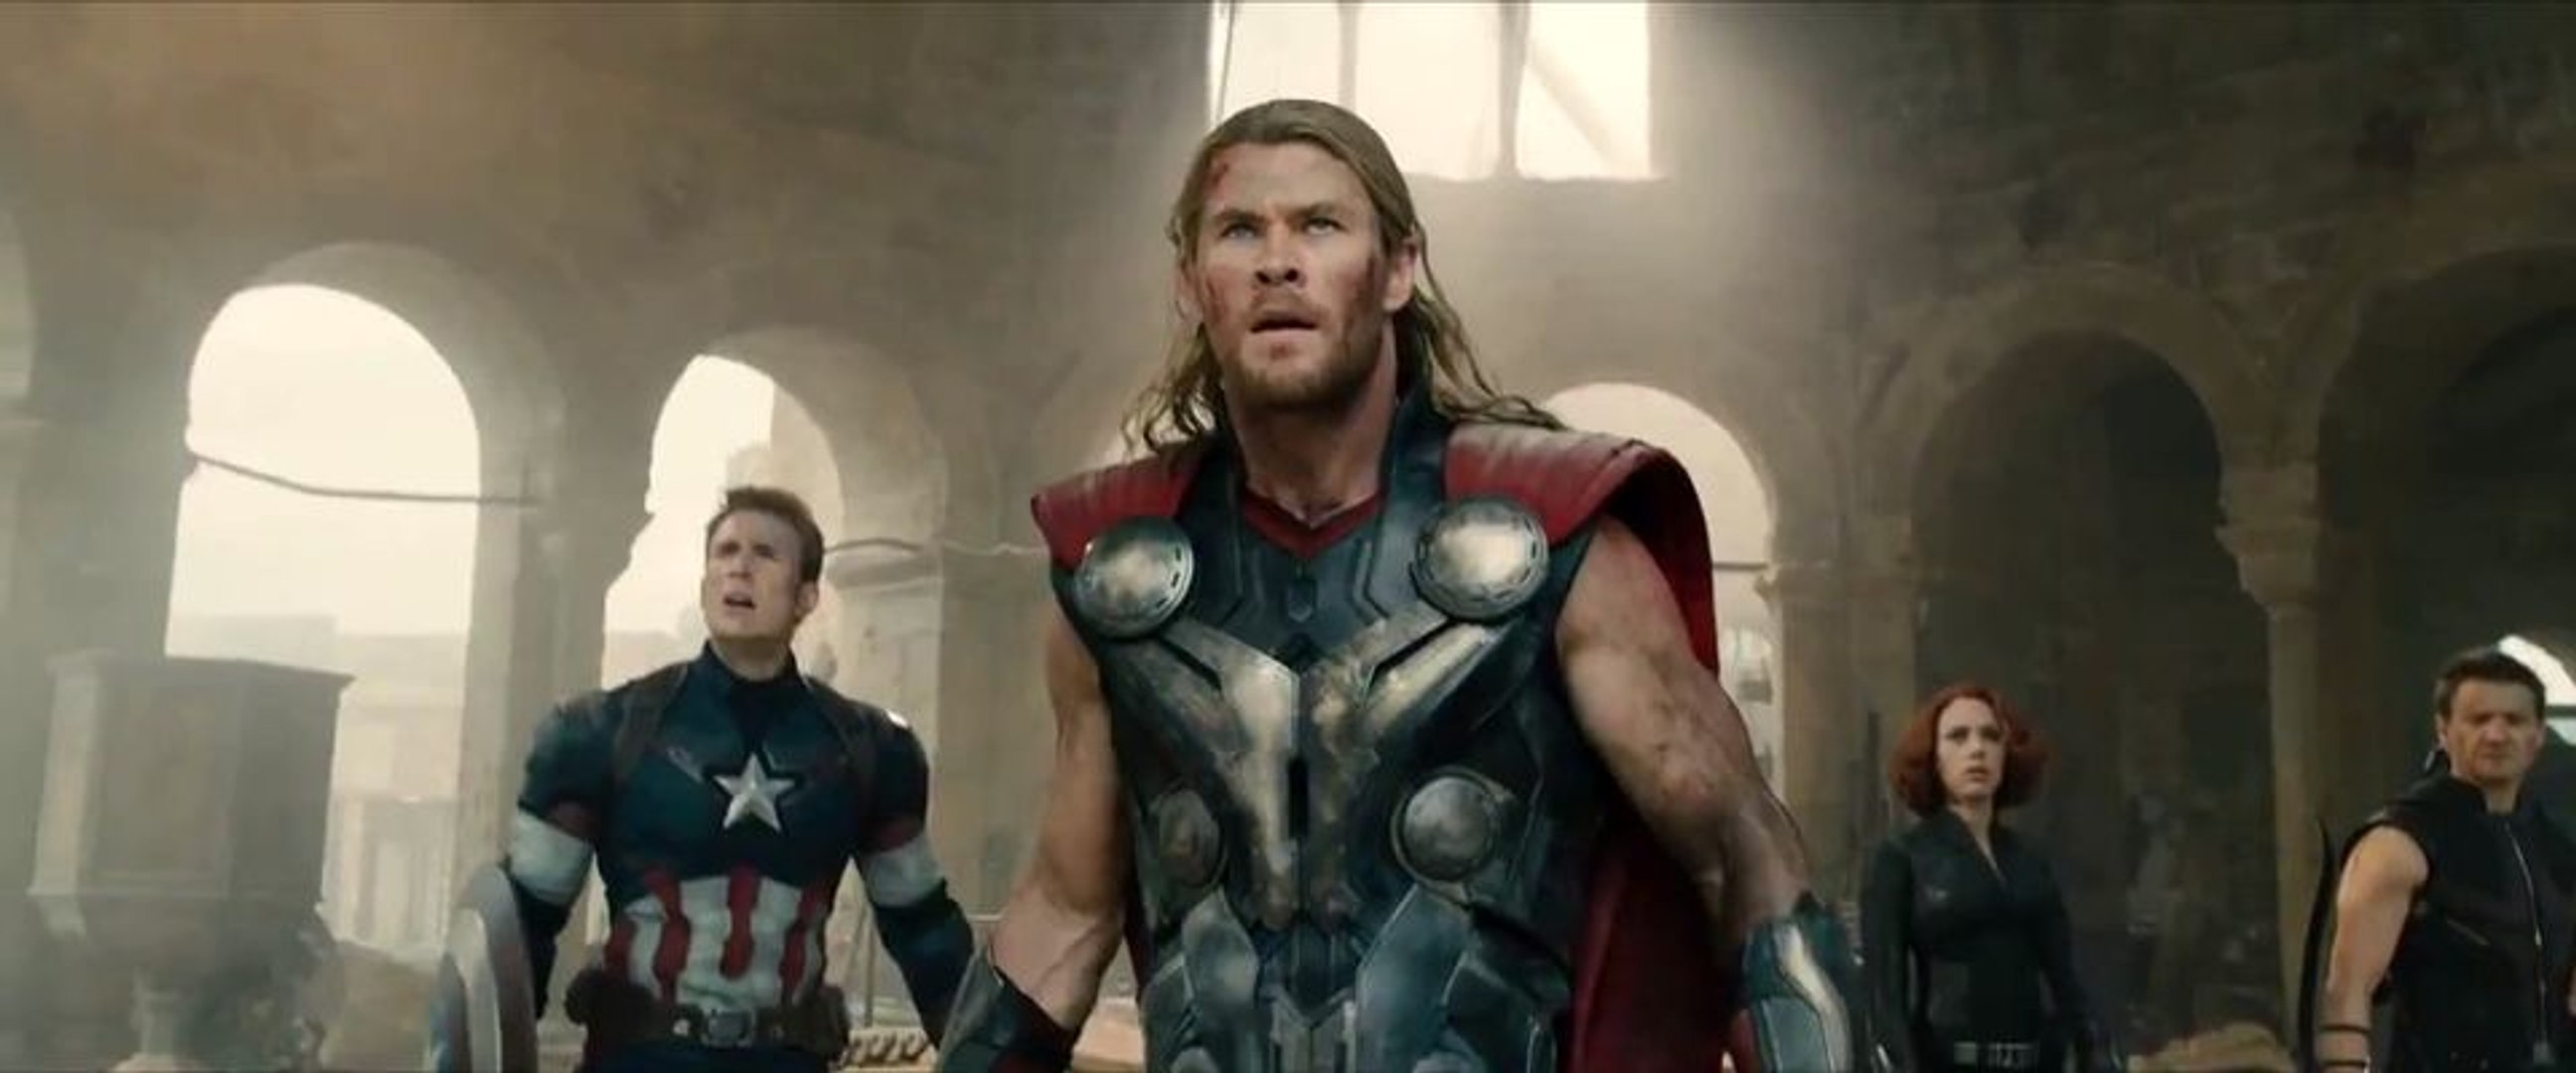 Avengers 2: Age of Ultron - Official Extended Trailer - video Dailymotion